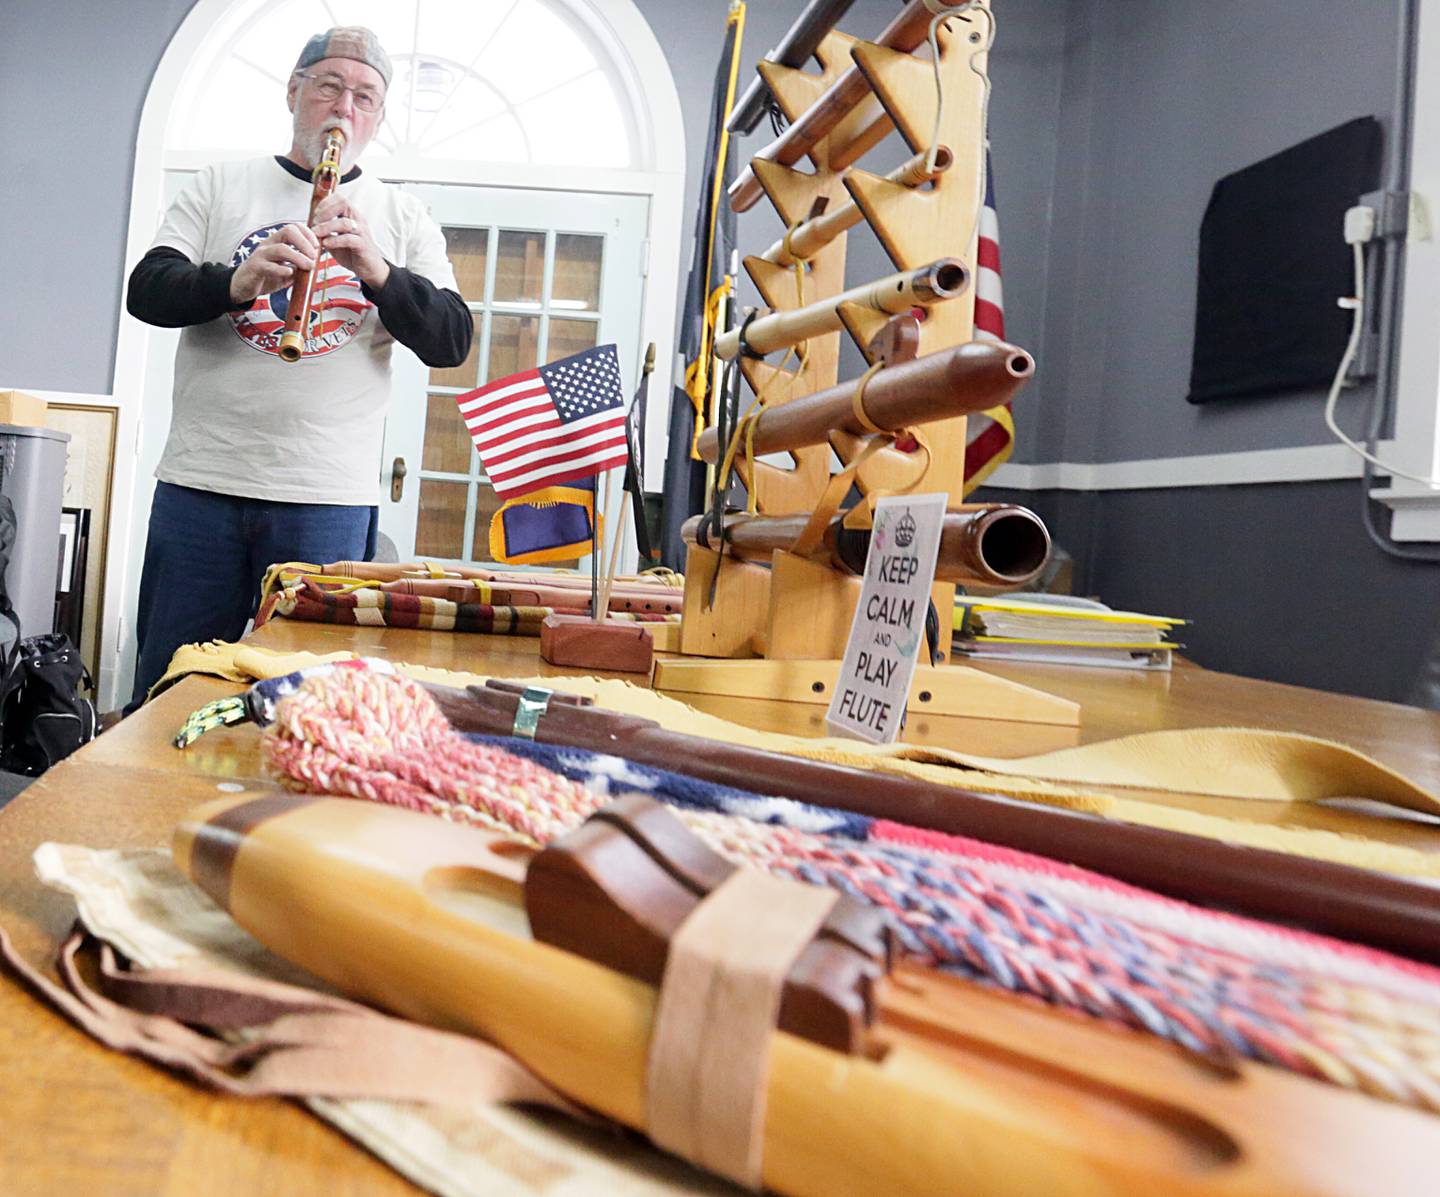 Ken Troyan, founder of "Flutes for Vets" plays one of his flutes at the American Legion post 33 in Ottawa on Thursday Jan. 6, 2022. Troyan, starved the program last year for something to give back to veterans. The program provides each veteran with a free beginner flute to practice on. Veterans interested in the program can email Troyan at kennethroyan@gmail.com